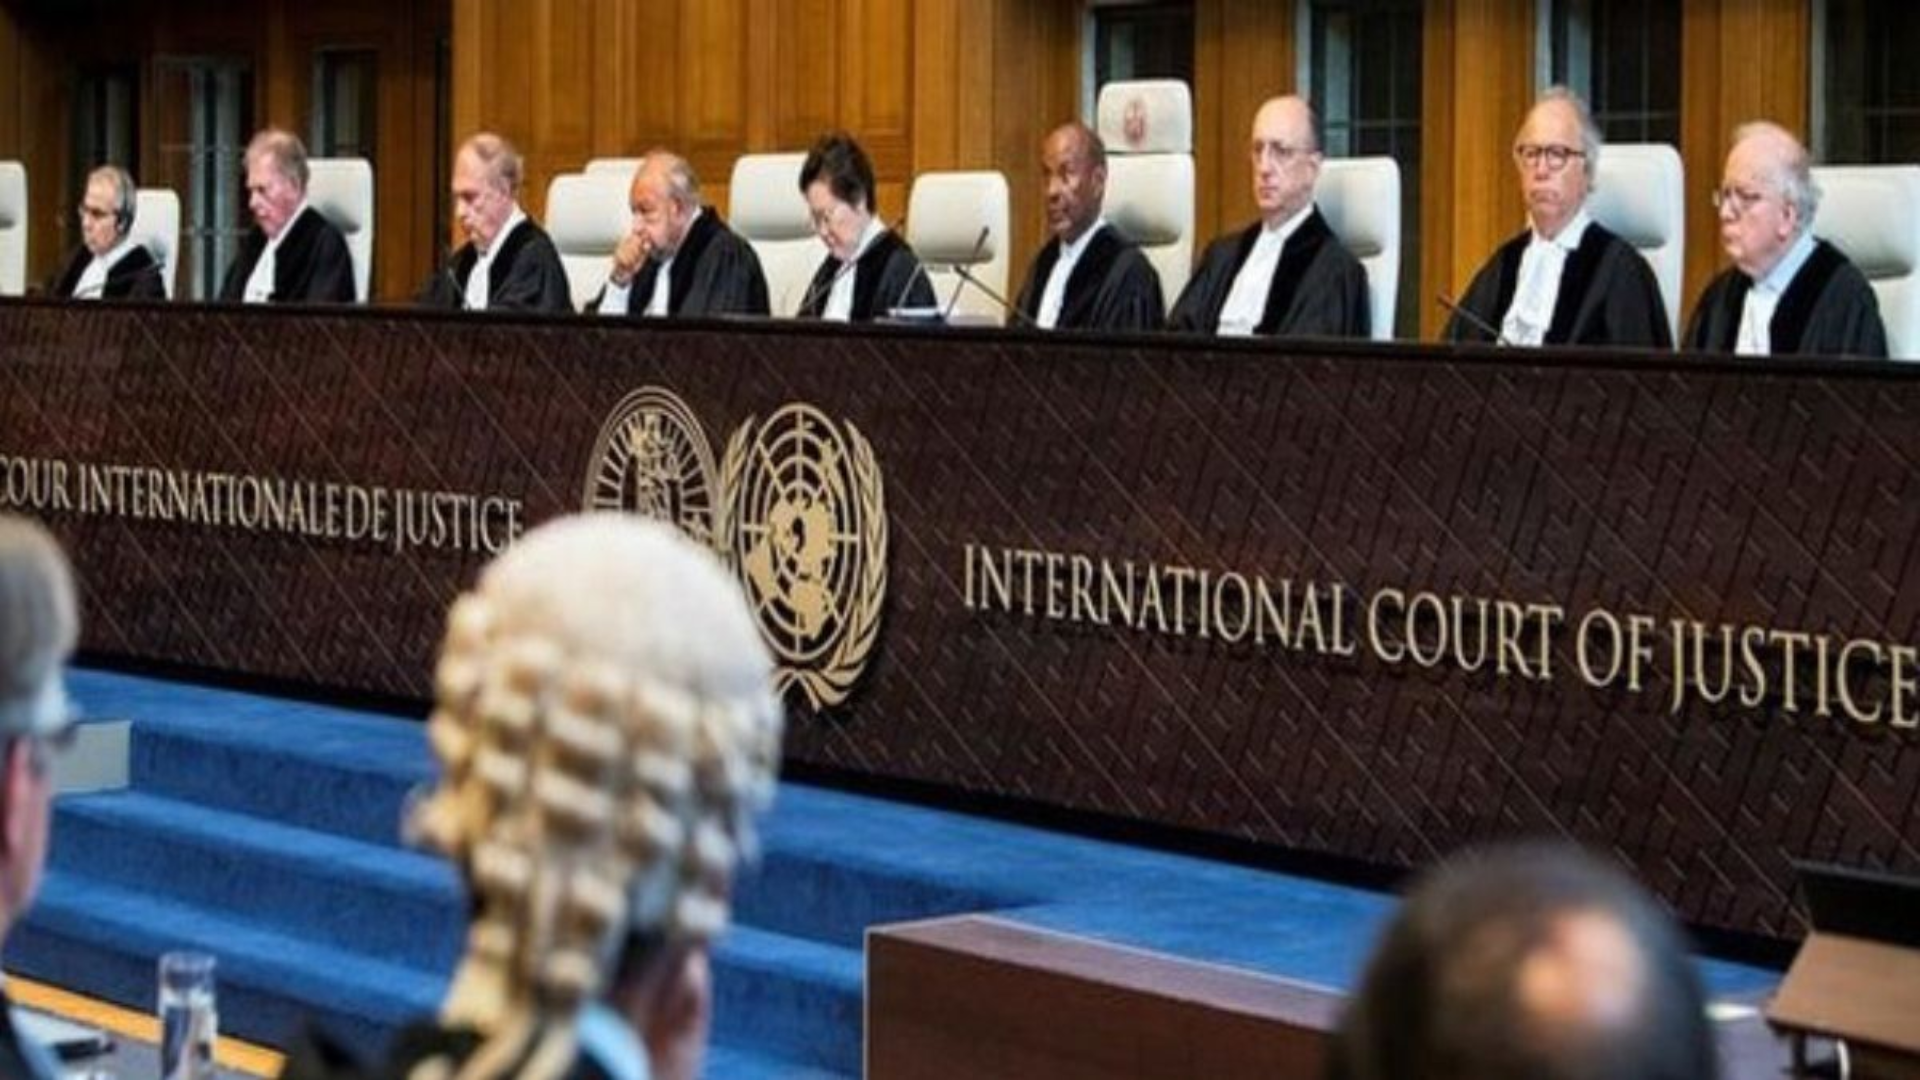 South Africa Urges International Court of Justice to Take Emergency Action Against Israel Over Gaza Offensive